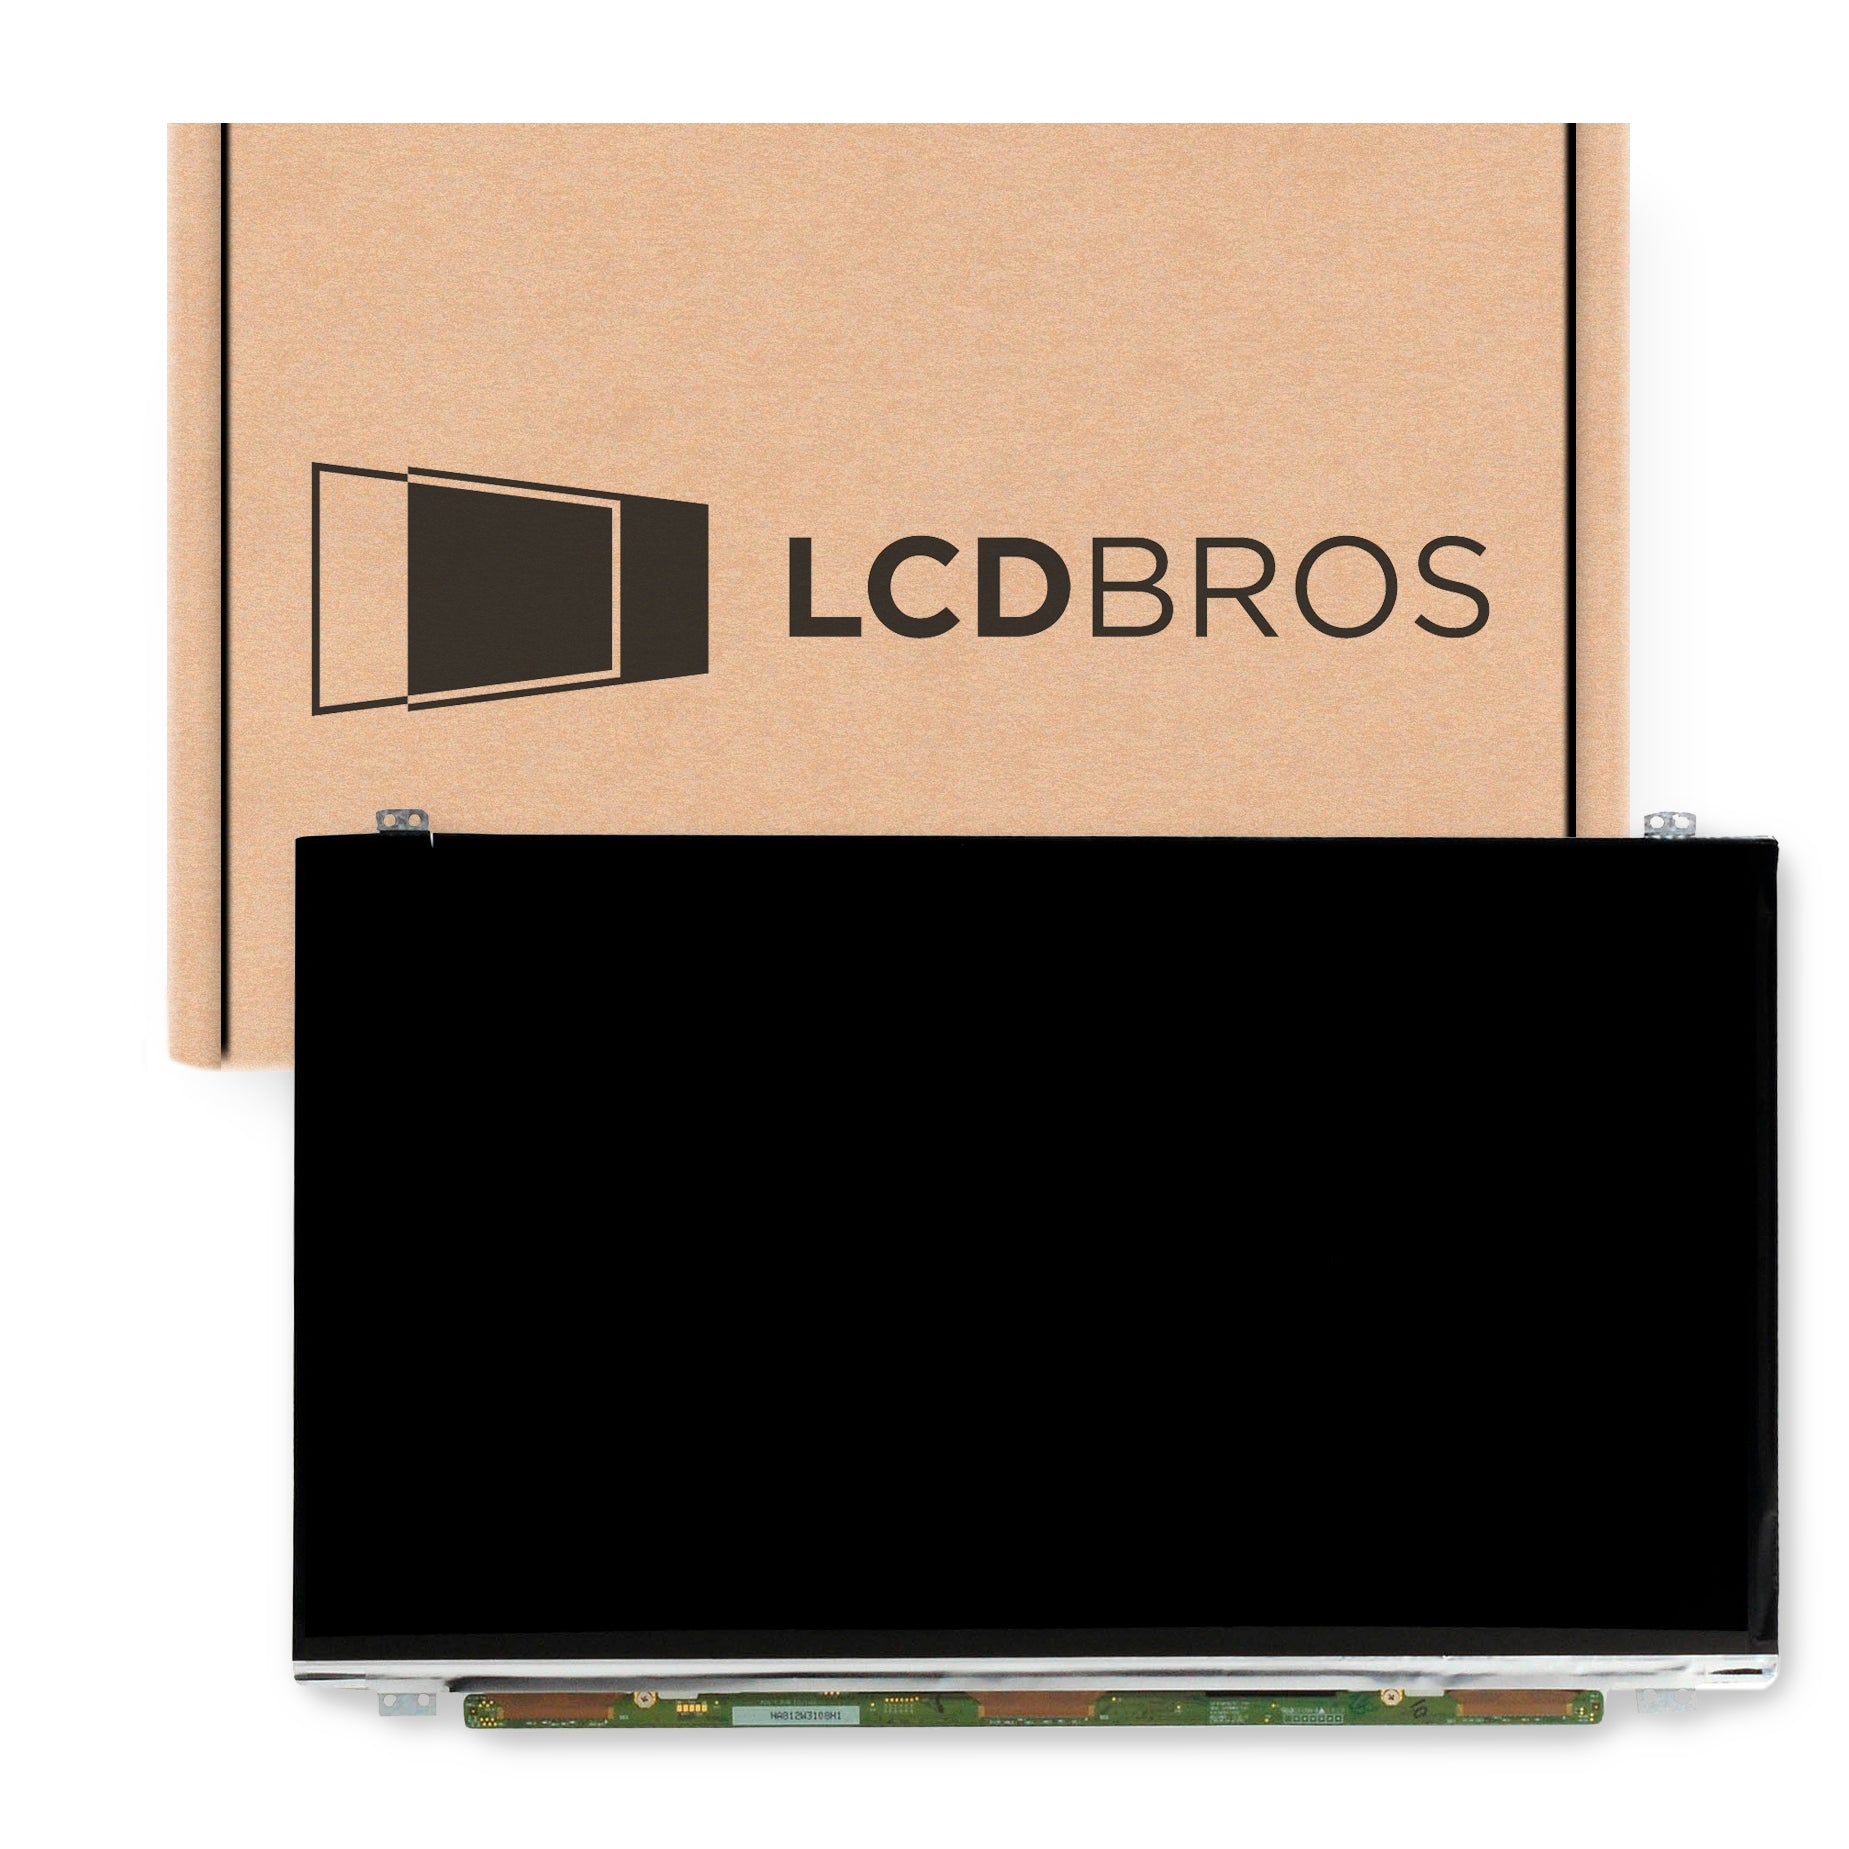 Replacement Screen For ASUS X555LA-DB51 HD 1366x768 Glossy LCD LED Display